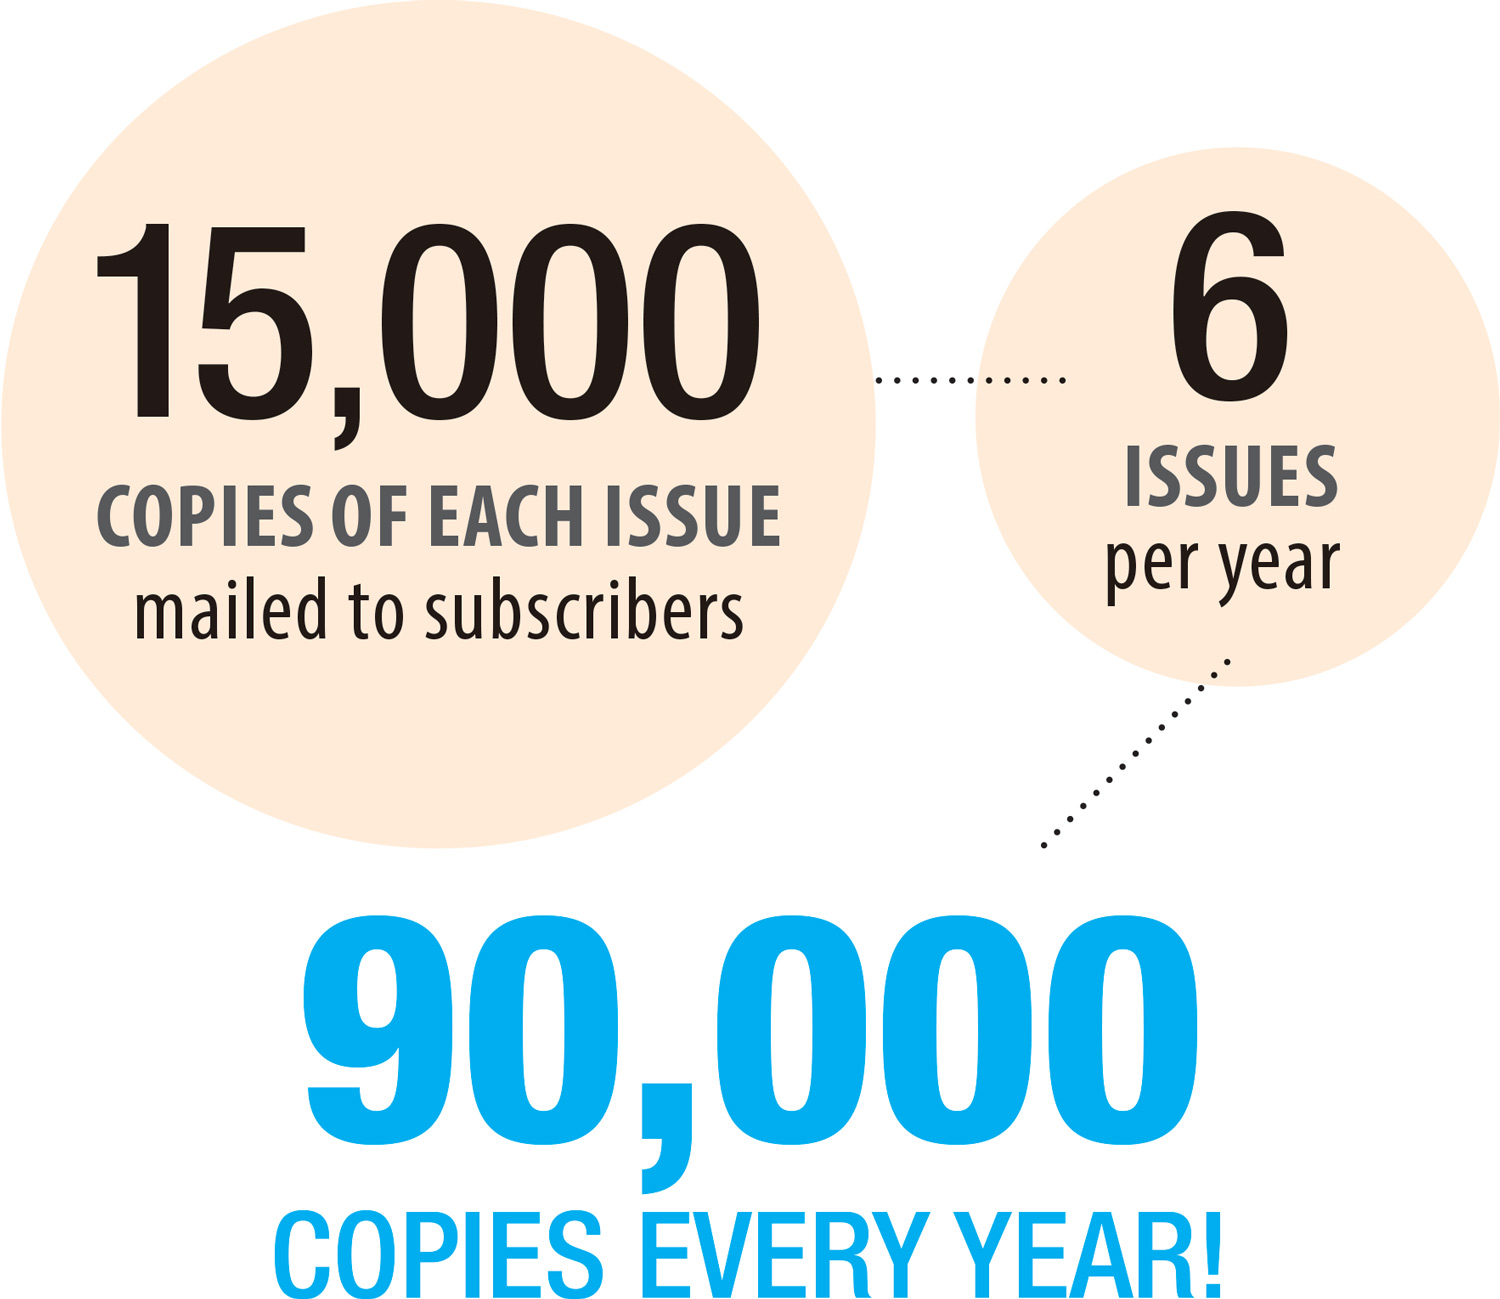 15,000 copies of each issue mailed to subscribers; 6 issues per year; 90,000 copies every year!